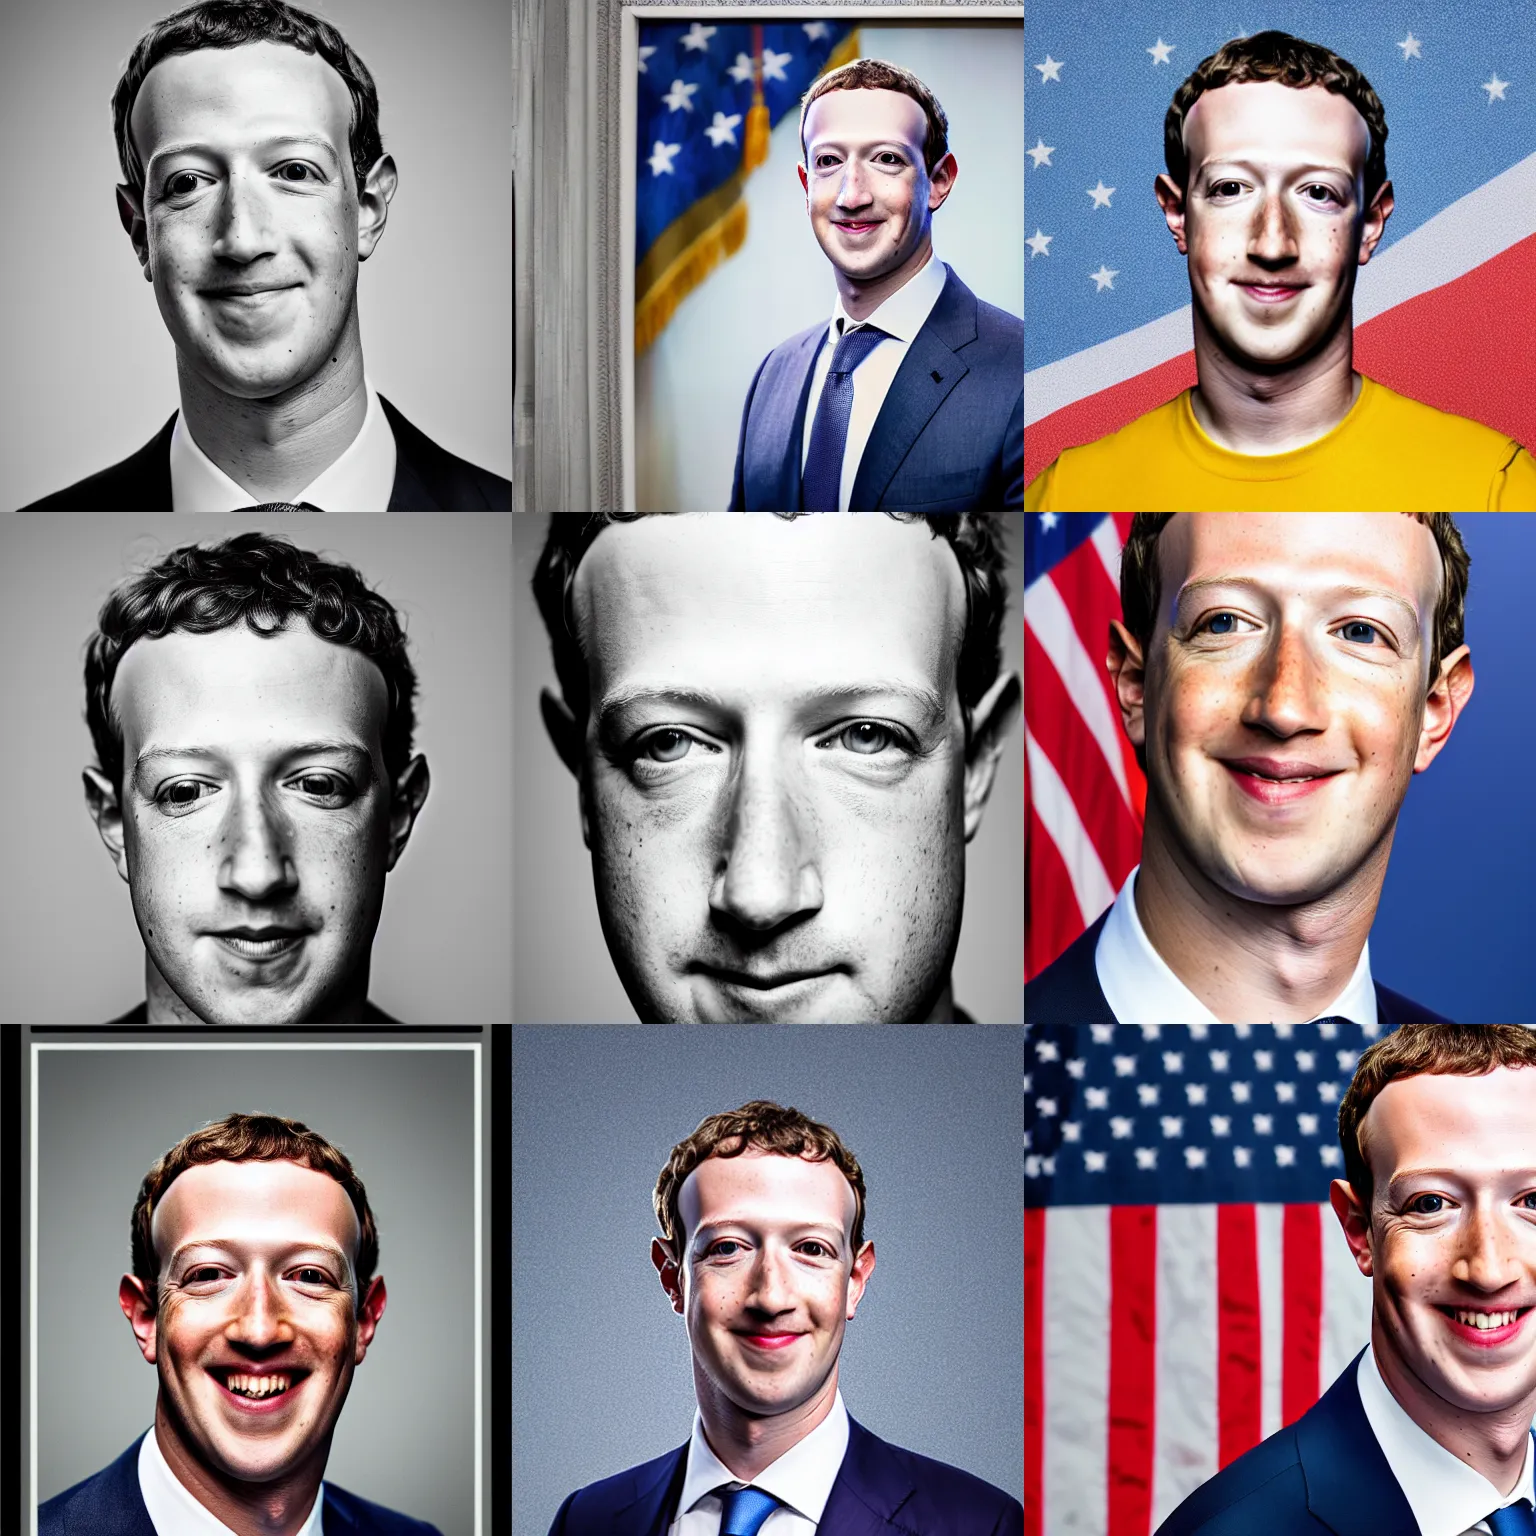 Prompt: headshot of Mark Zuckerberg as the president of the united states, official government portrait, EOS-1D, f/1.4, ISO 200, 1/160s, 8K, RAW, unedited, symmetrical balance, in-frame, Photoshop, Nvidia, Topaz AI